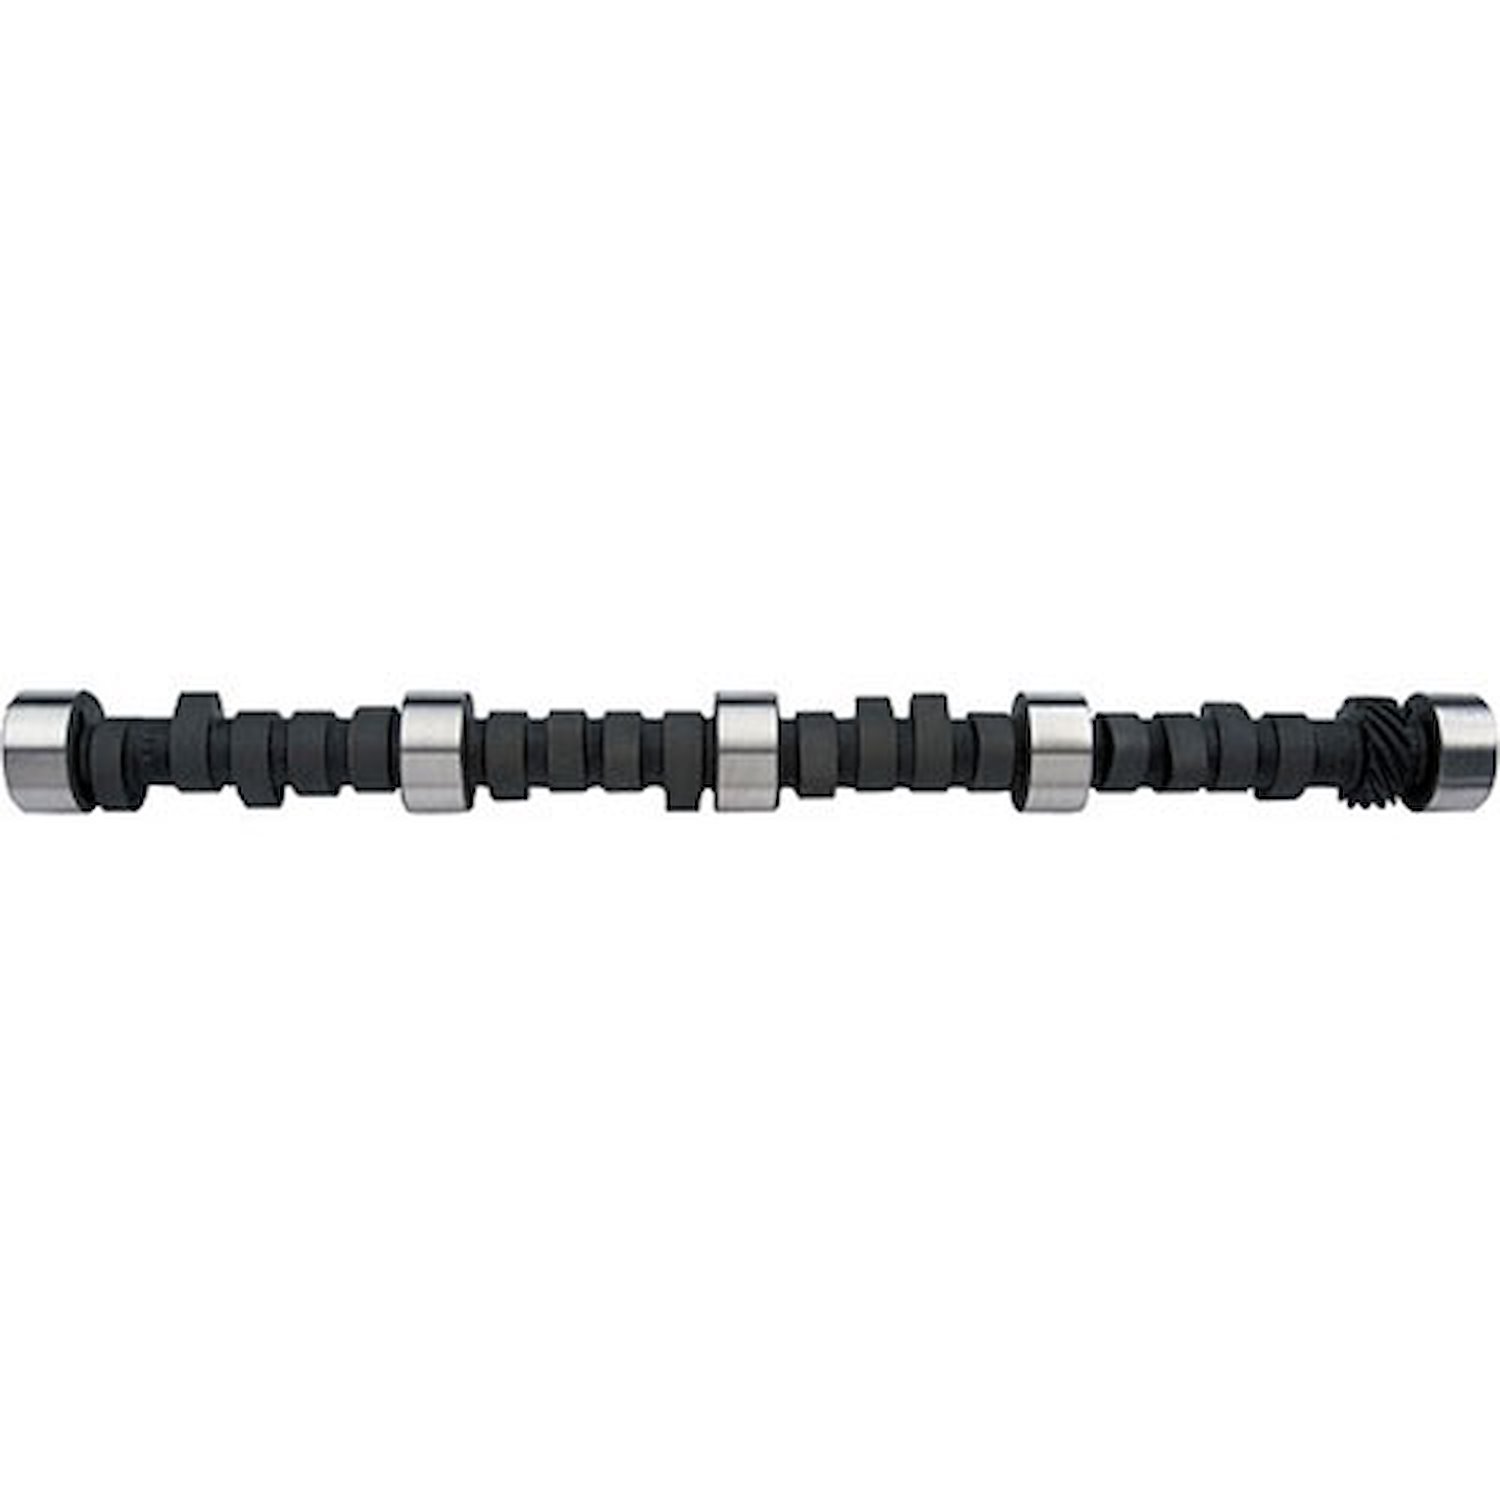 Hydraulic Flat Tappet Camshaft Small Block Chevy